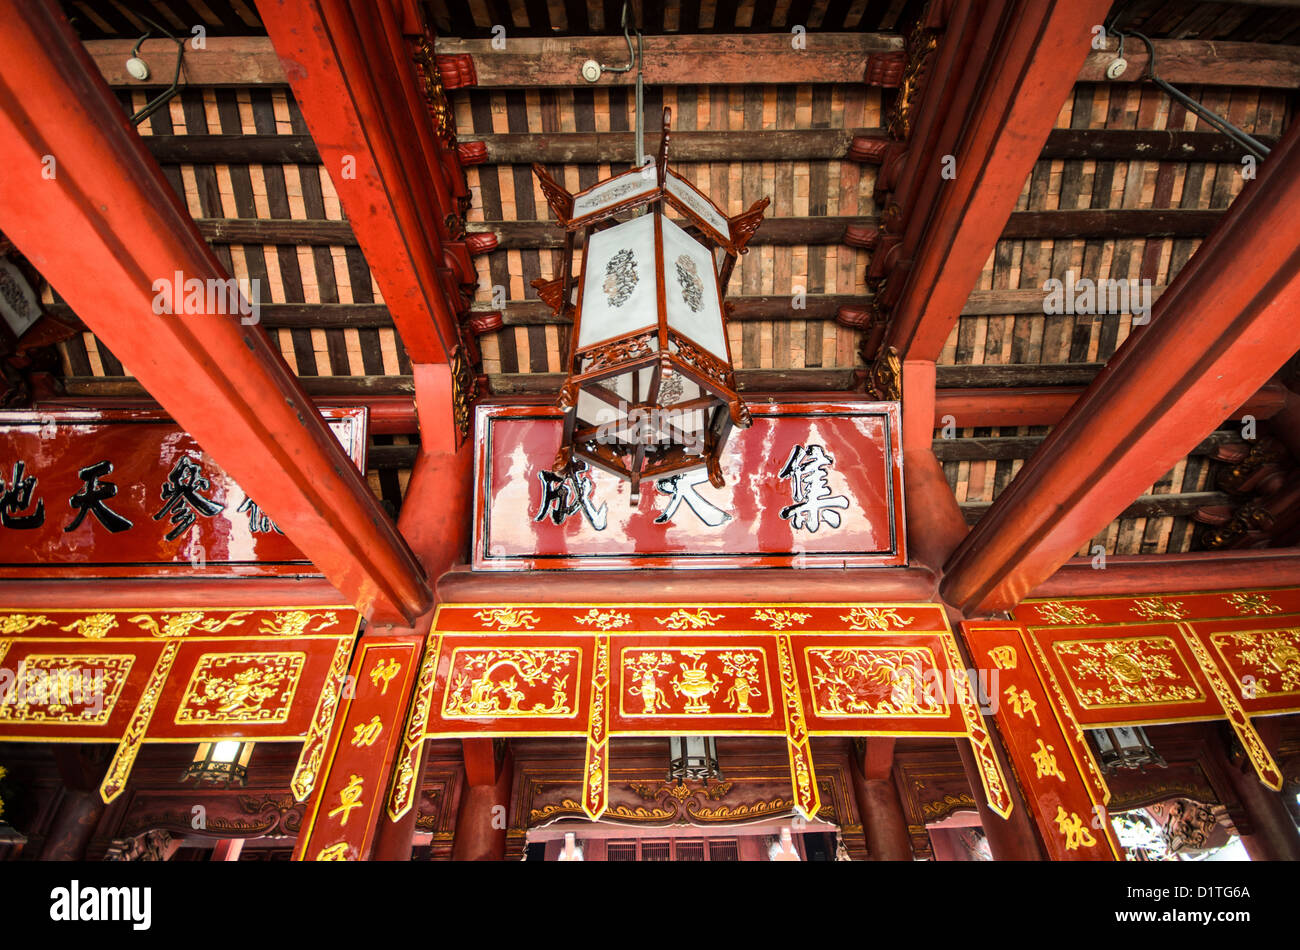 HANOI, Vietnam - The Temple of Literature in Hanoi, Vietnam, is a center of learning and scholarship dedicated to Confucius and first established in 1070. The temple was built in 1070 and is one of several temples in Vietnam which are dedicated to Confucius, sages and scholars. Stock Photo